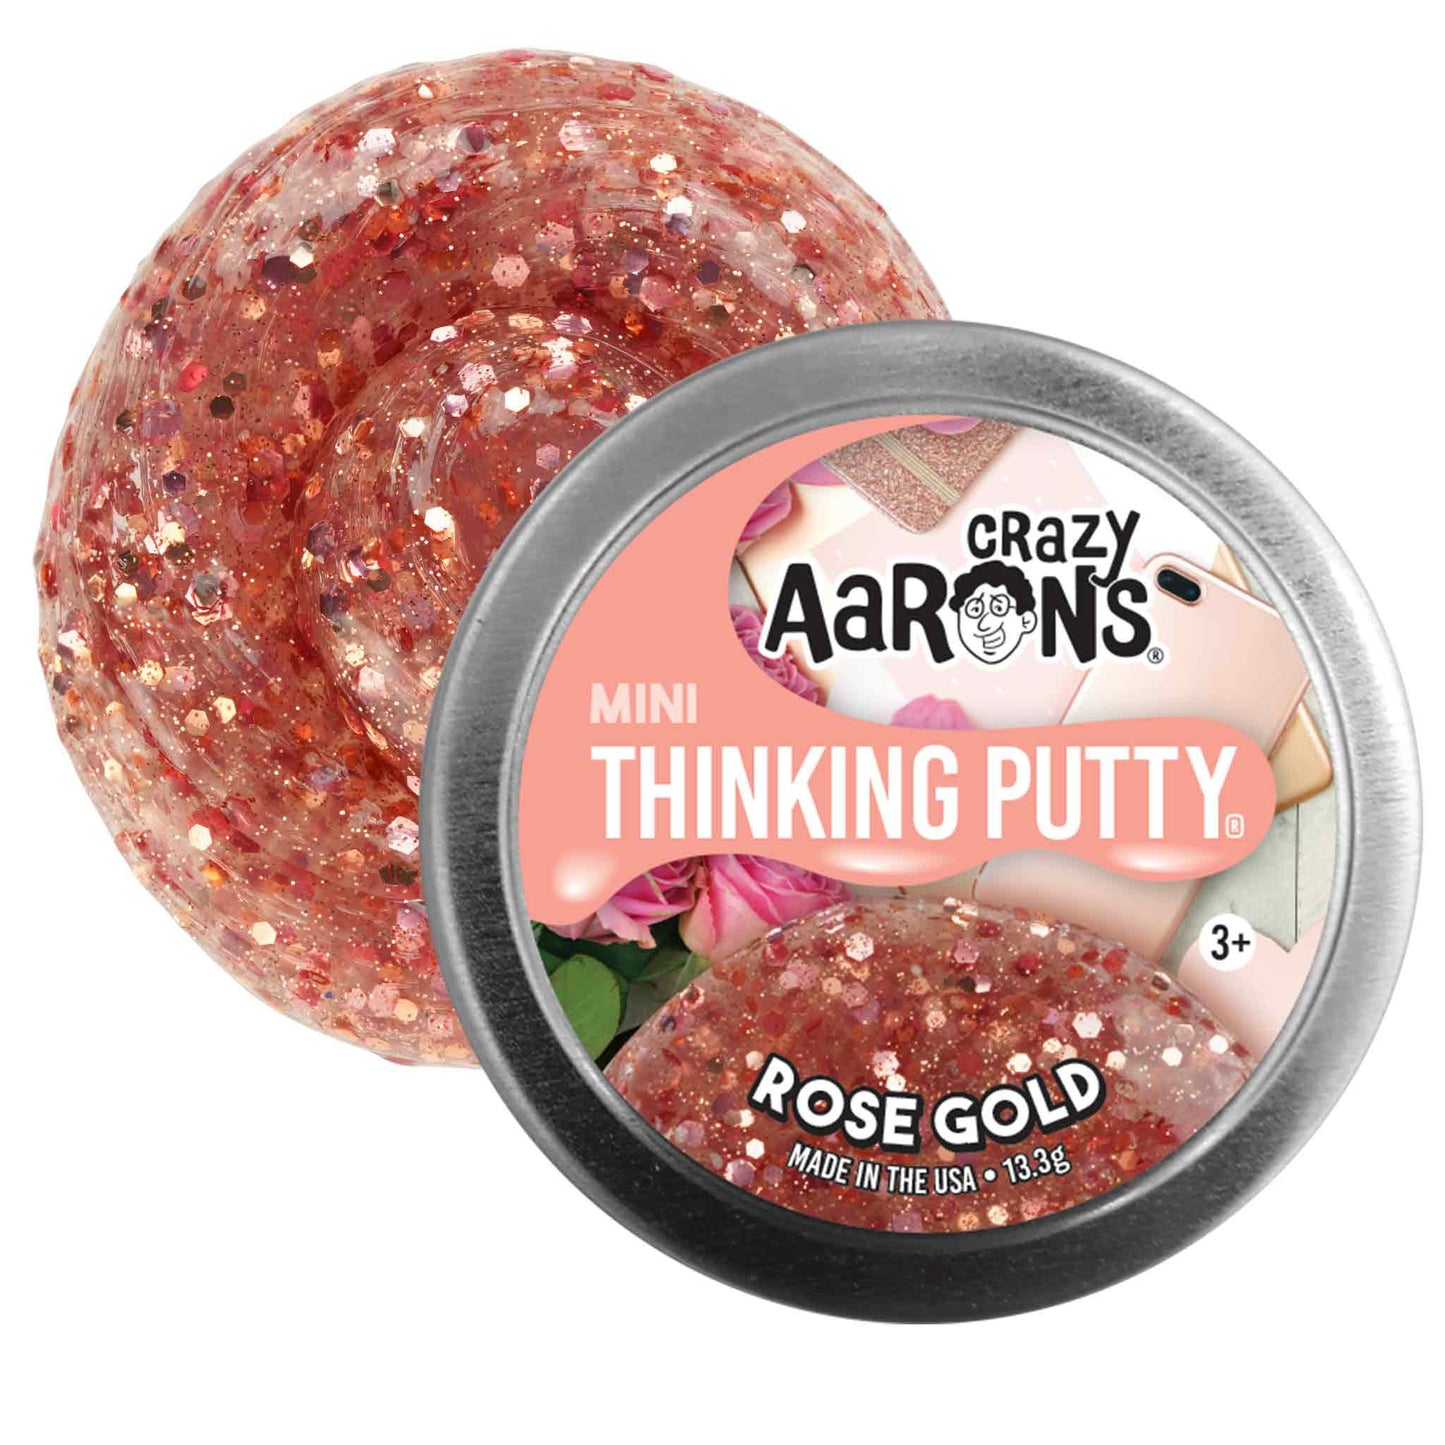 Crazy Aaron's Thinking Putty Mini ROSE GOLD